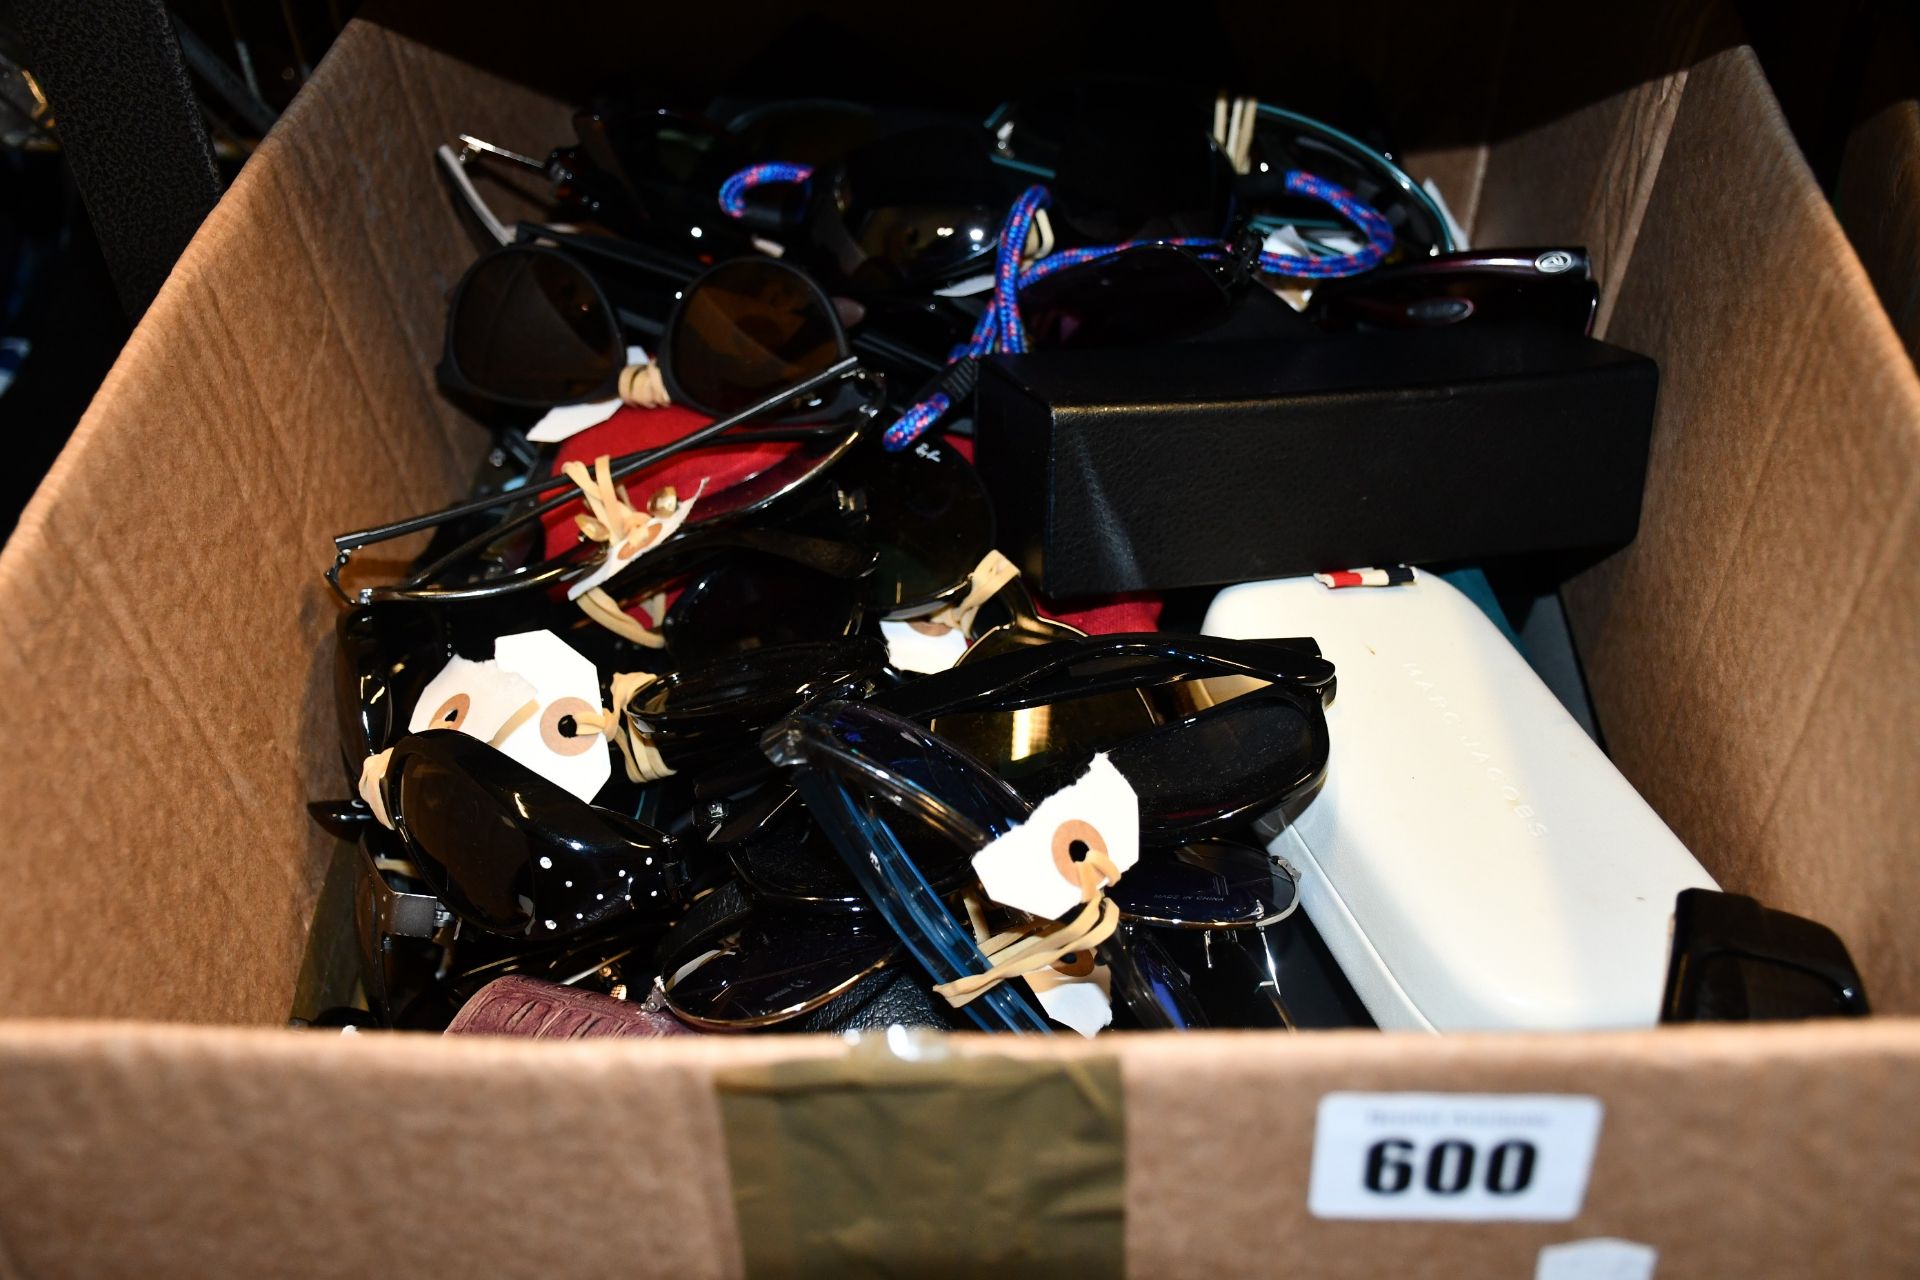 A box of unbranded sunglasses/glasses.